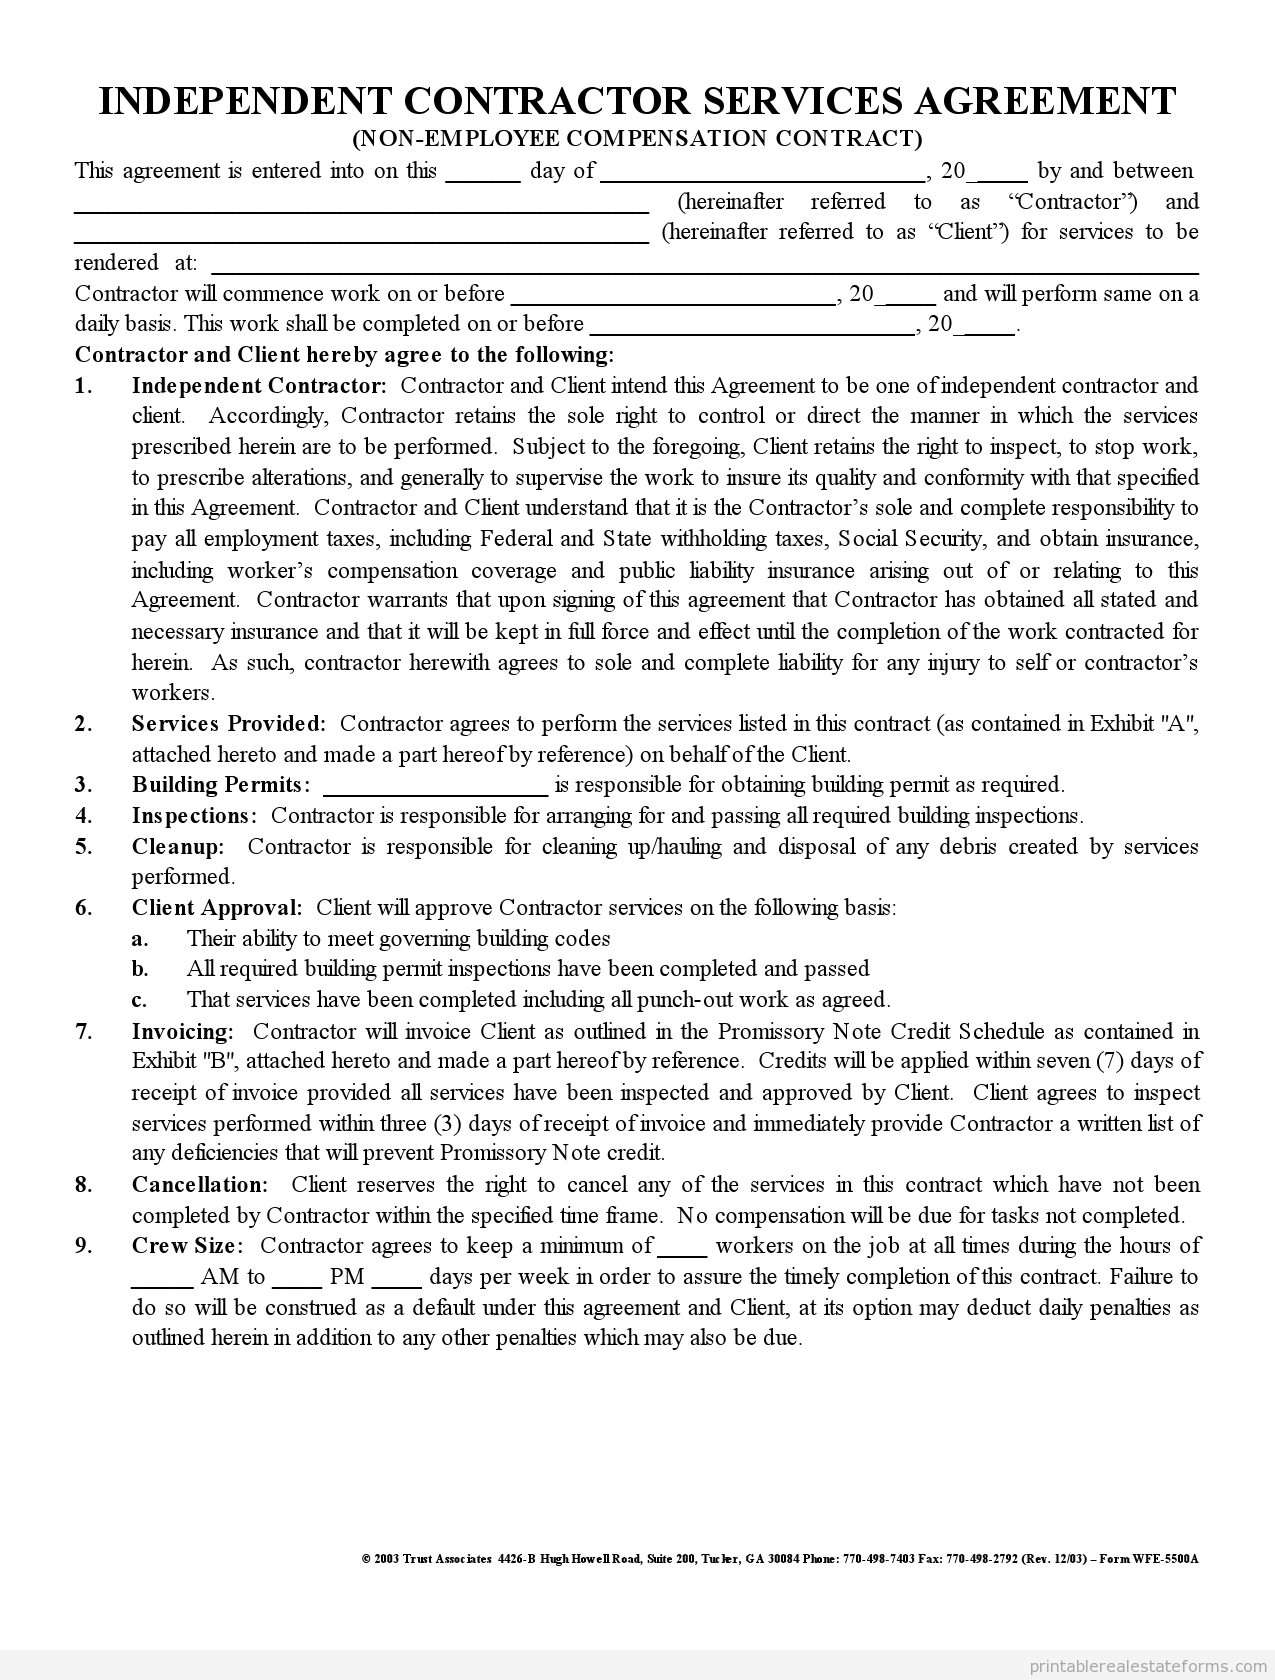 Printable Independent Contractor Agreement REAL ESTATE